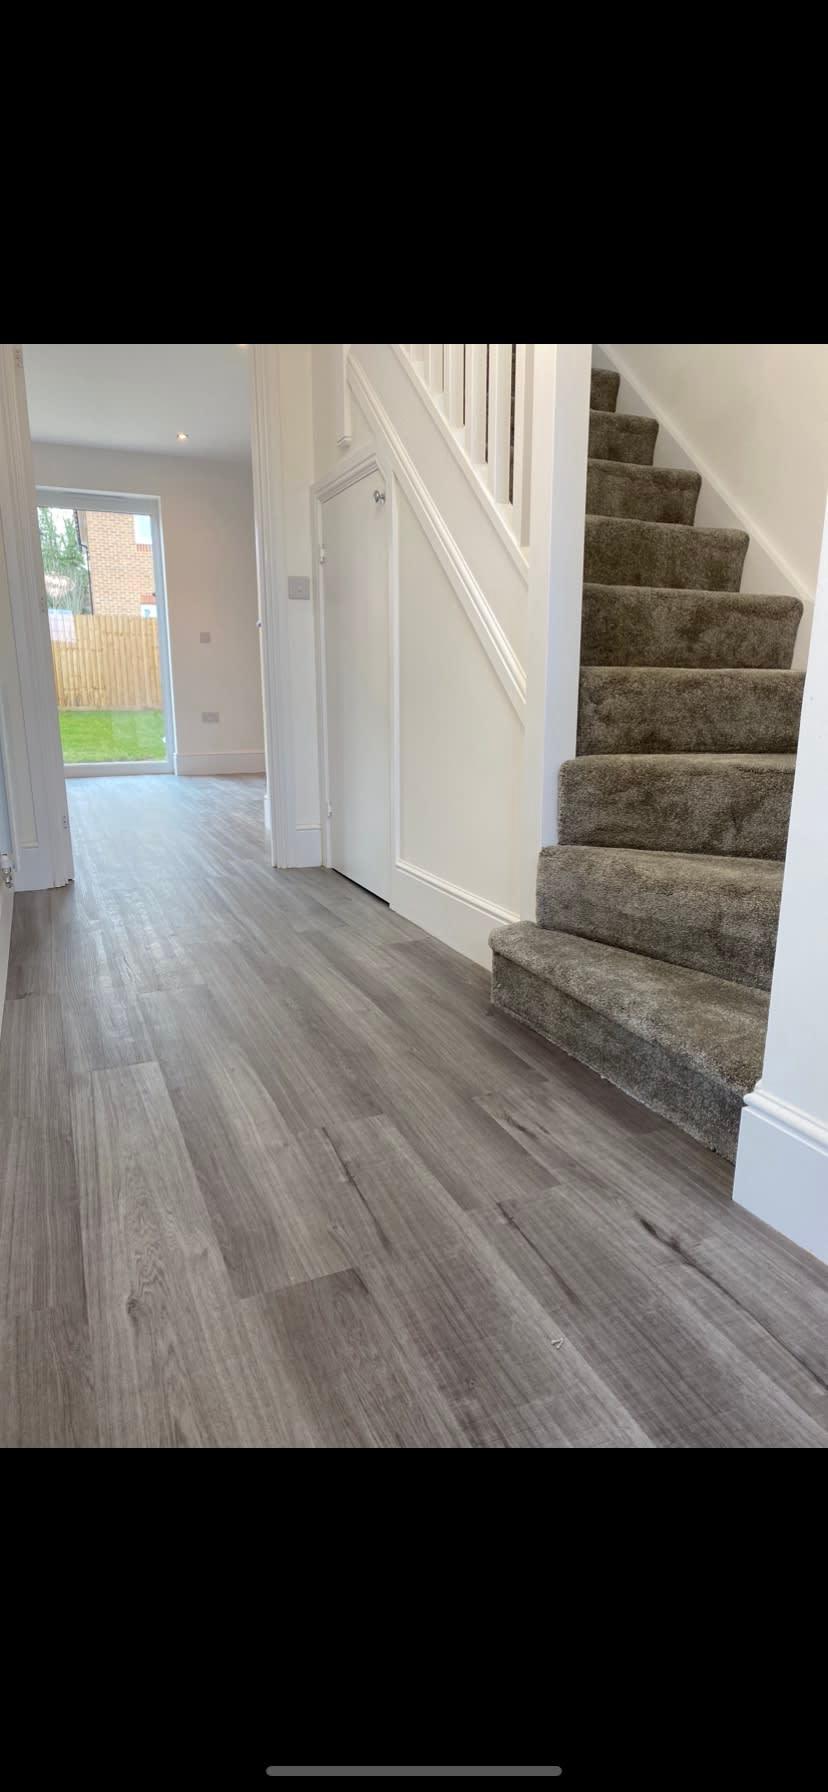 H&Co Flooring Solutions Harlow 07515 906665